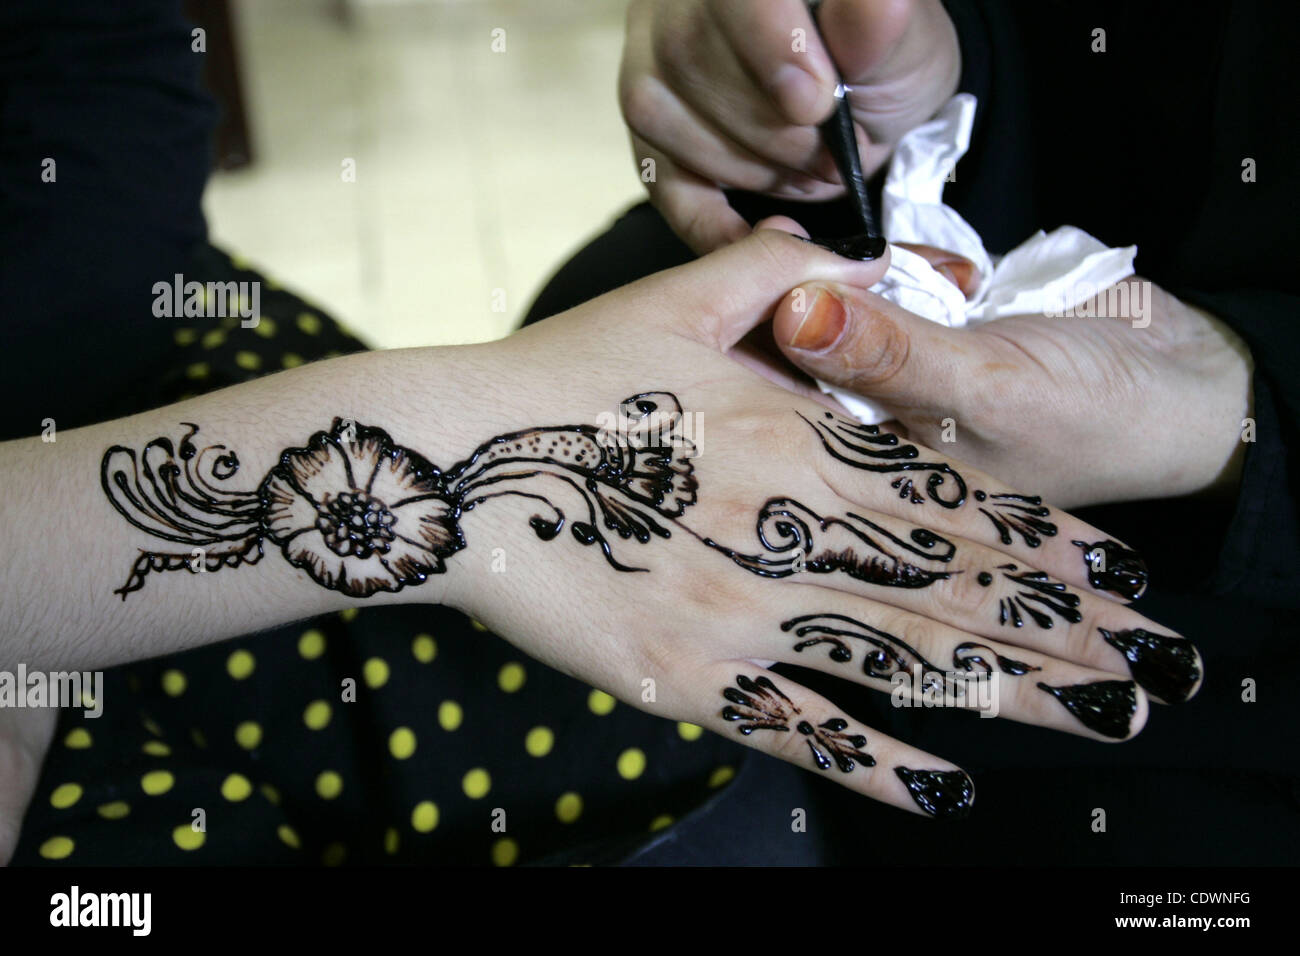 A Palestinian woman applies henna on the hand of a girl during a summer ...